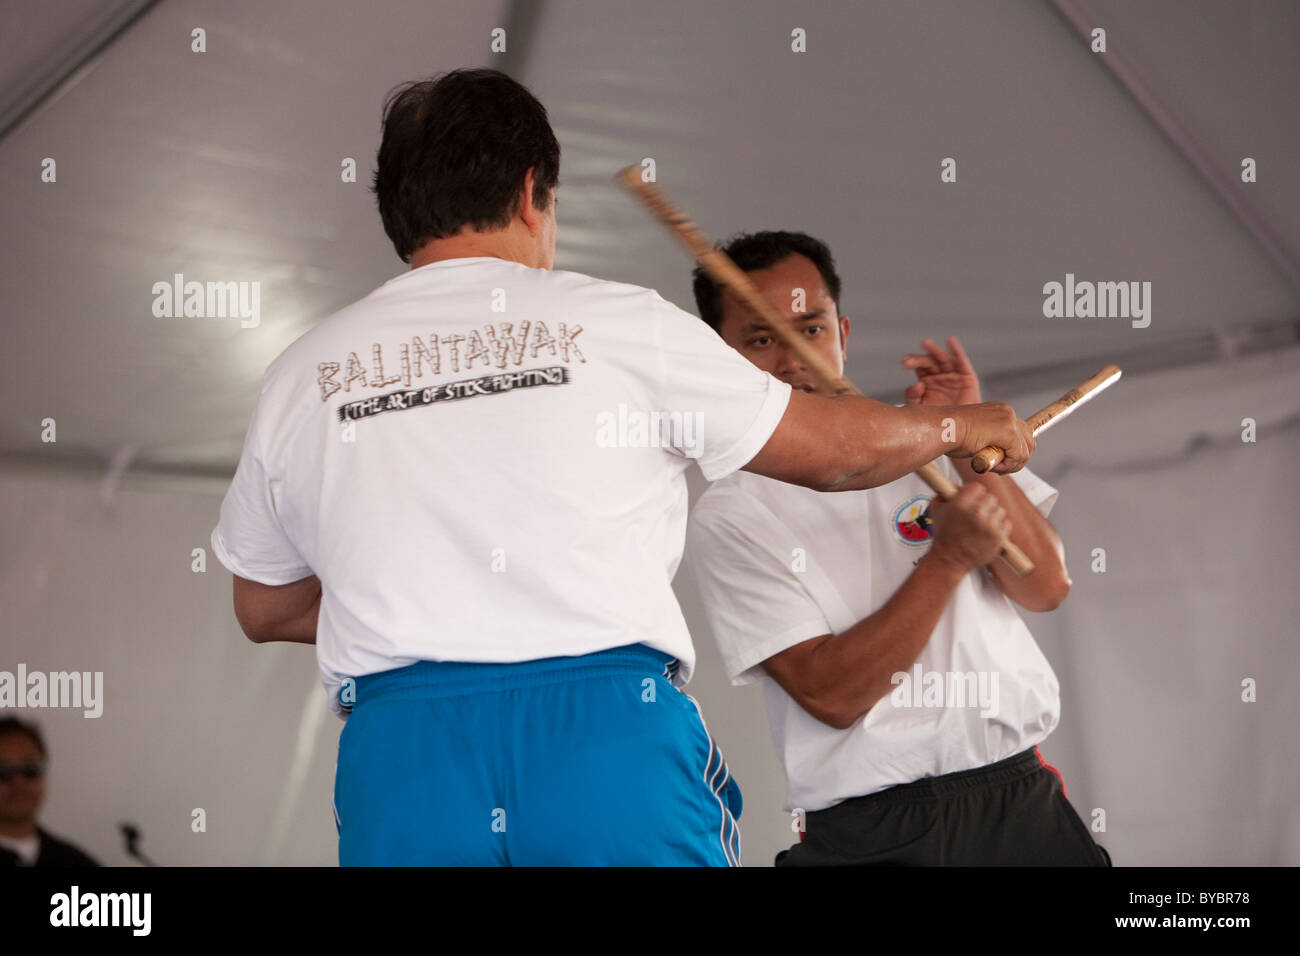 Lameco Astig Combatives instructor demonstrates stick fighting t